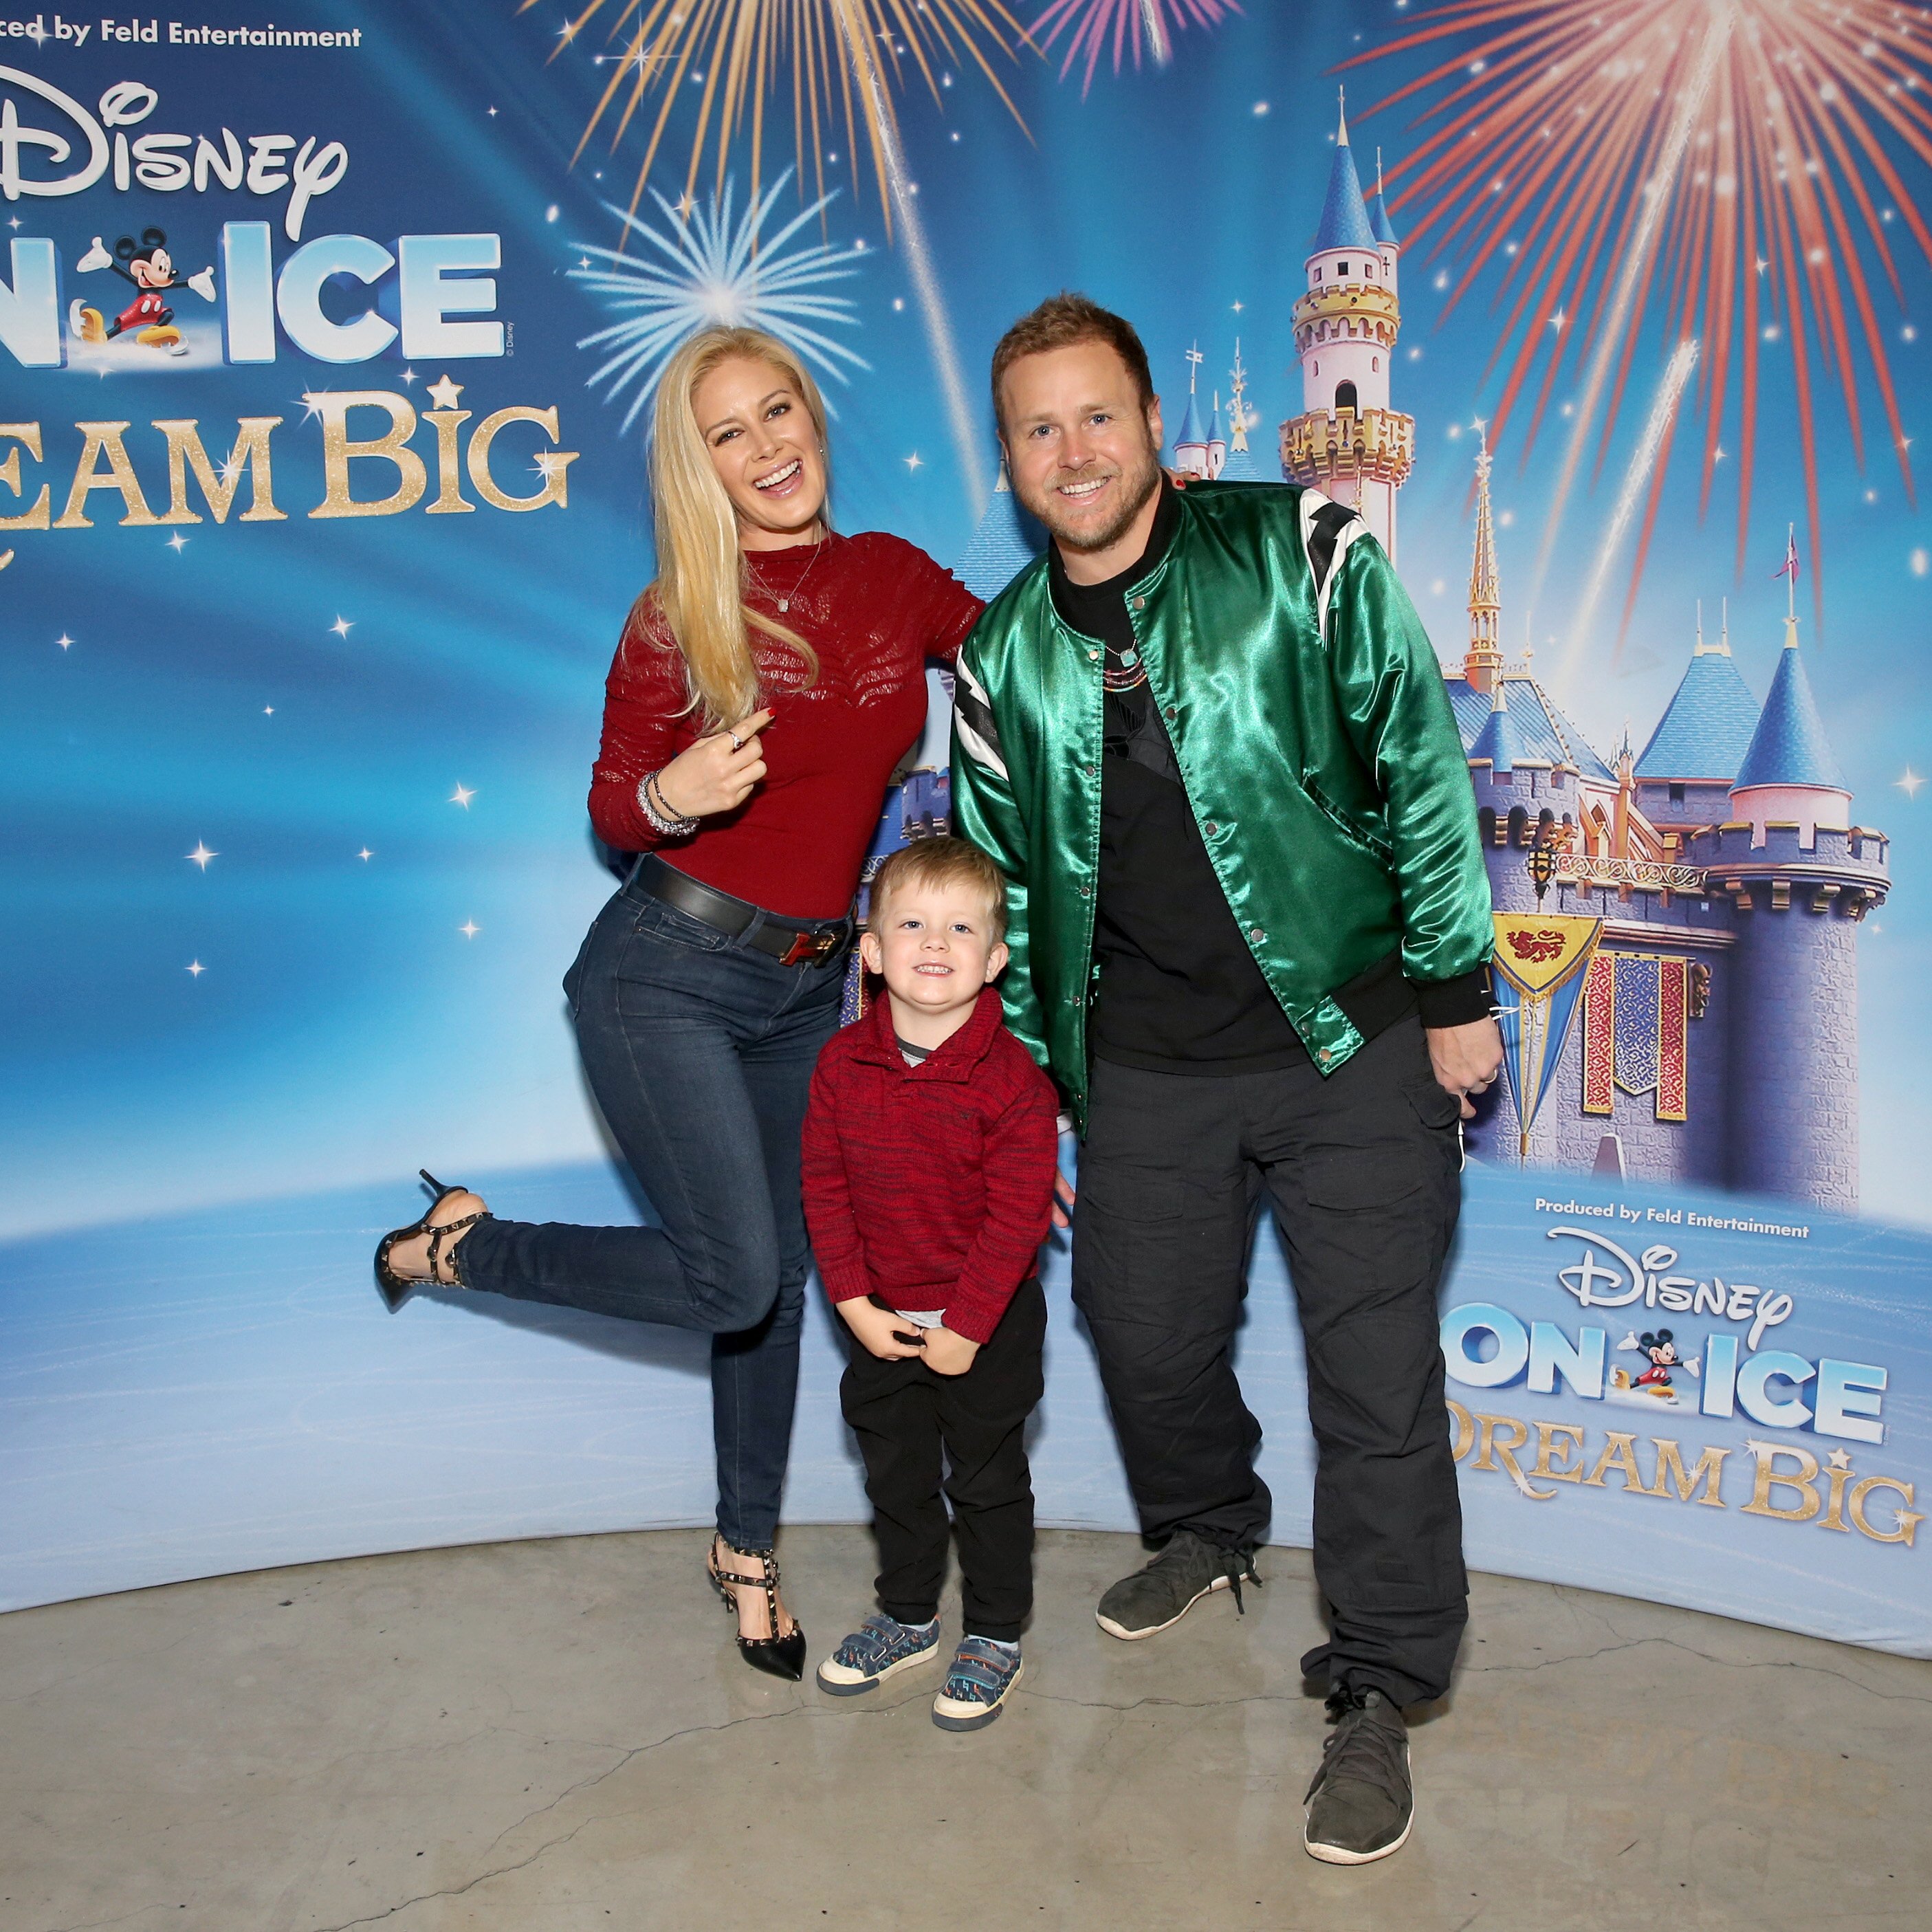  Heidi Montag, Gunner Stone, and Spencer Pratt at Disney On Ice at STAPLES Center Los Angeles at Staples Center on December 18, 2021 in Los Angeles, California. | Source: Getty Images